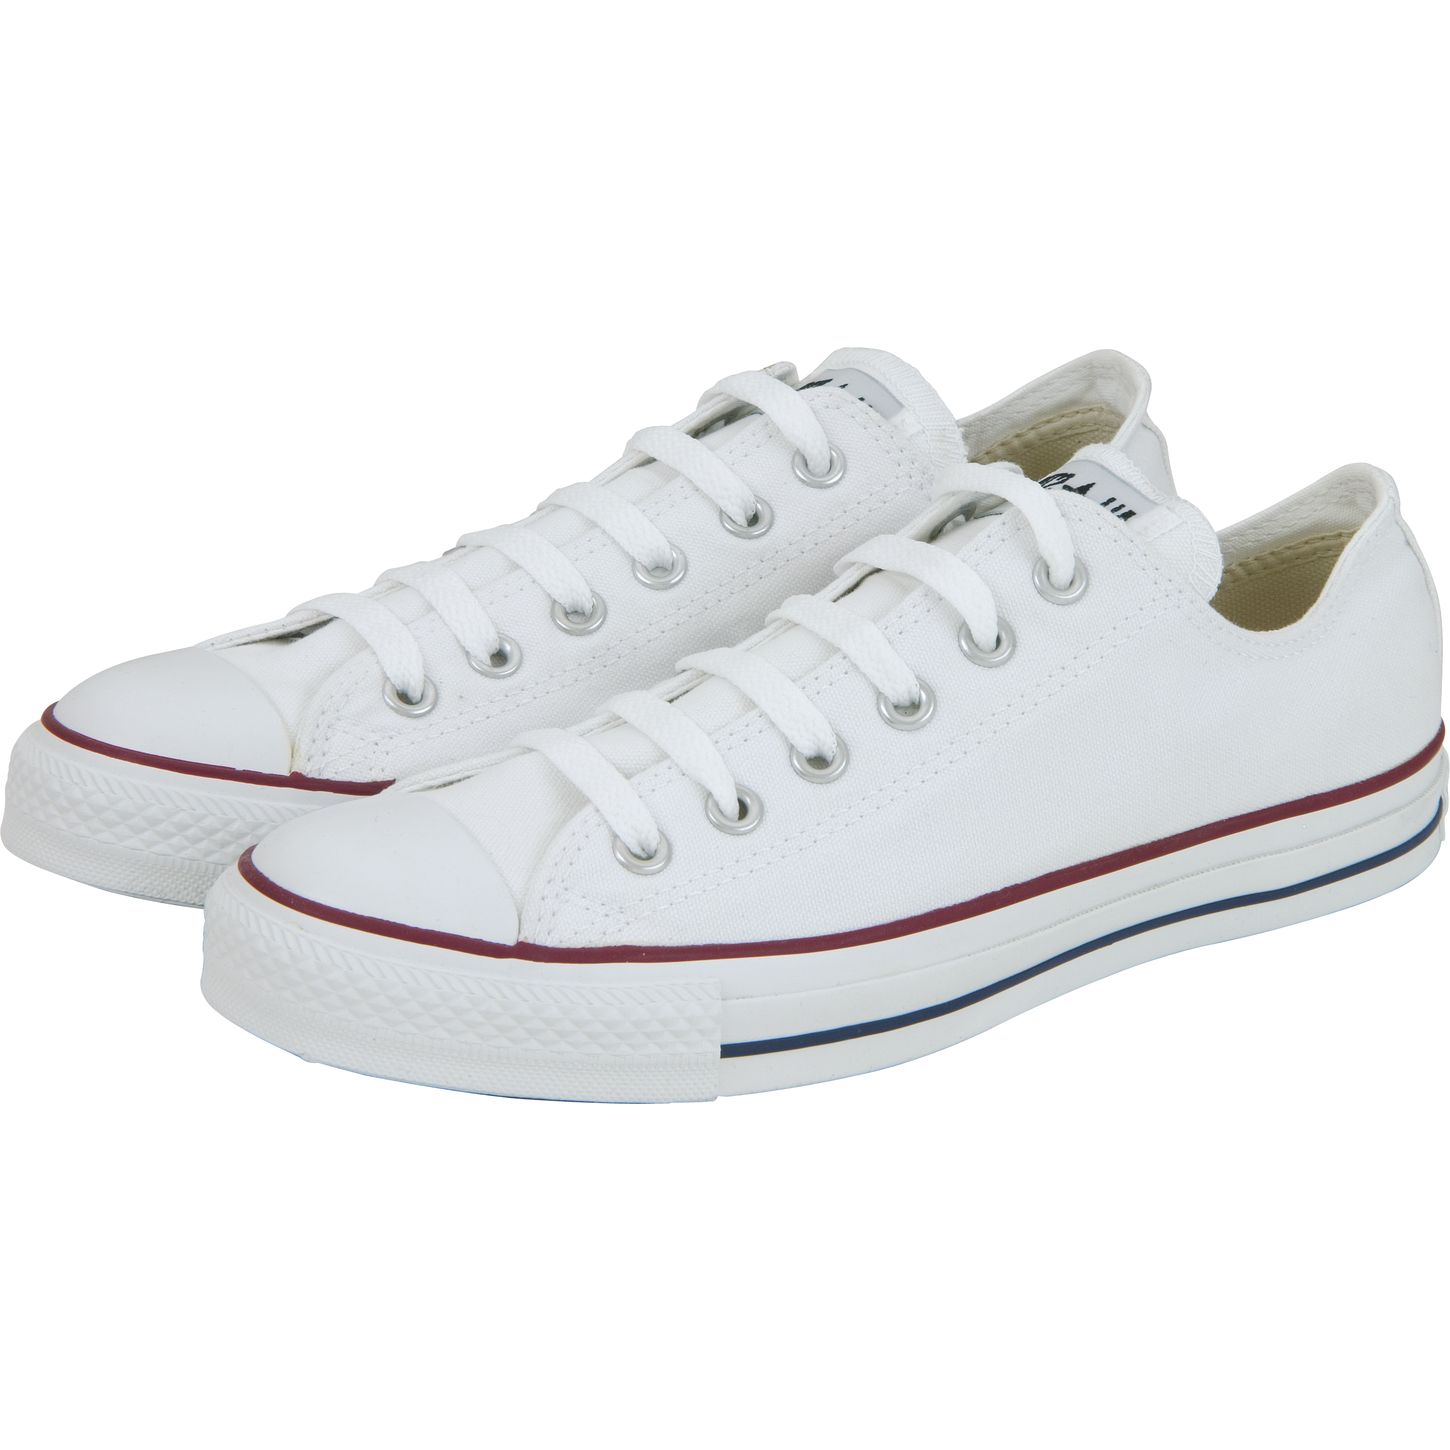 Converse Chuck Taylor All Star Core Oxford Low-Top Optical White ...